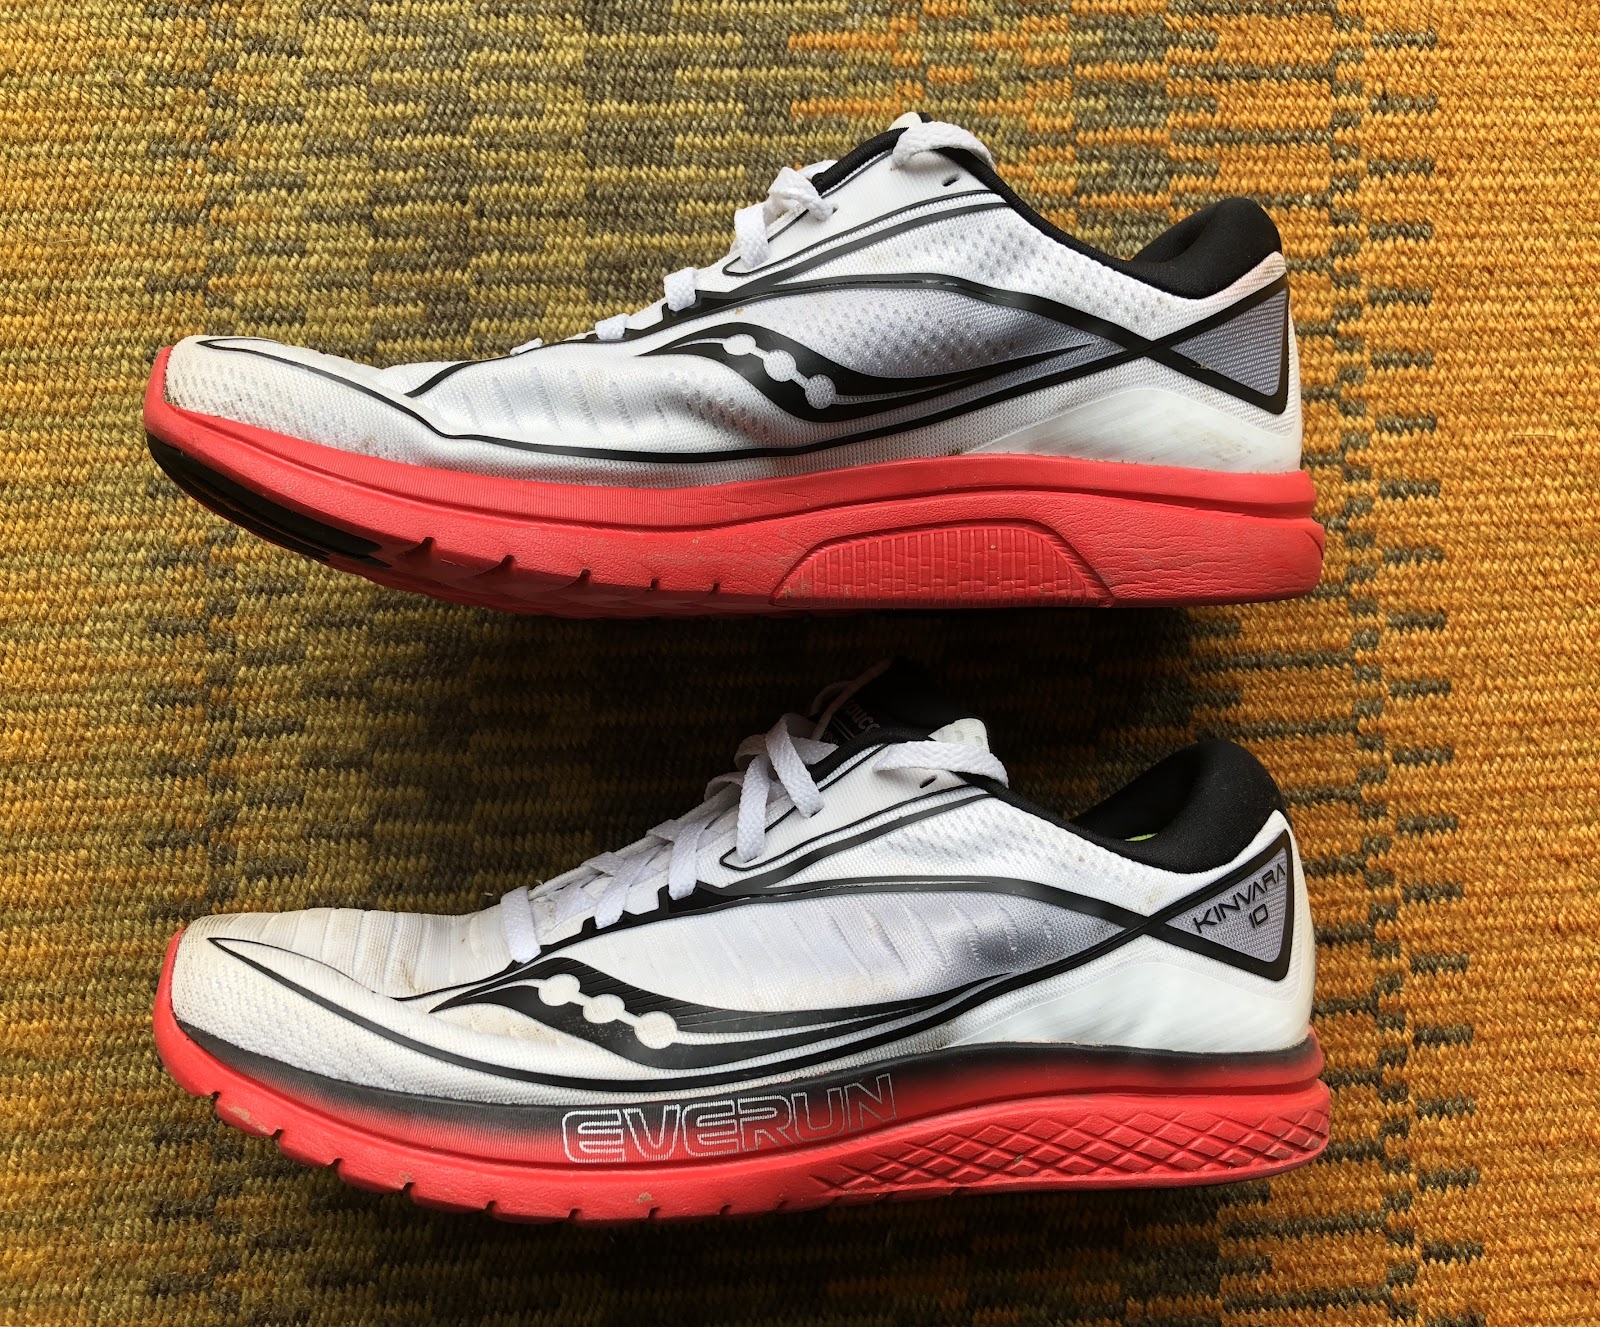 Road Trail Run: Saucony Kinvara 10 Review: It's a TKO! The real OG is back!